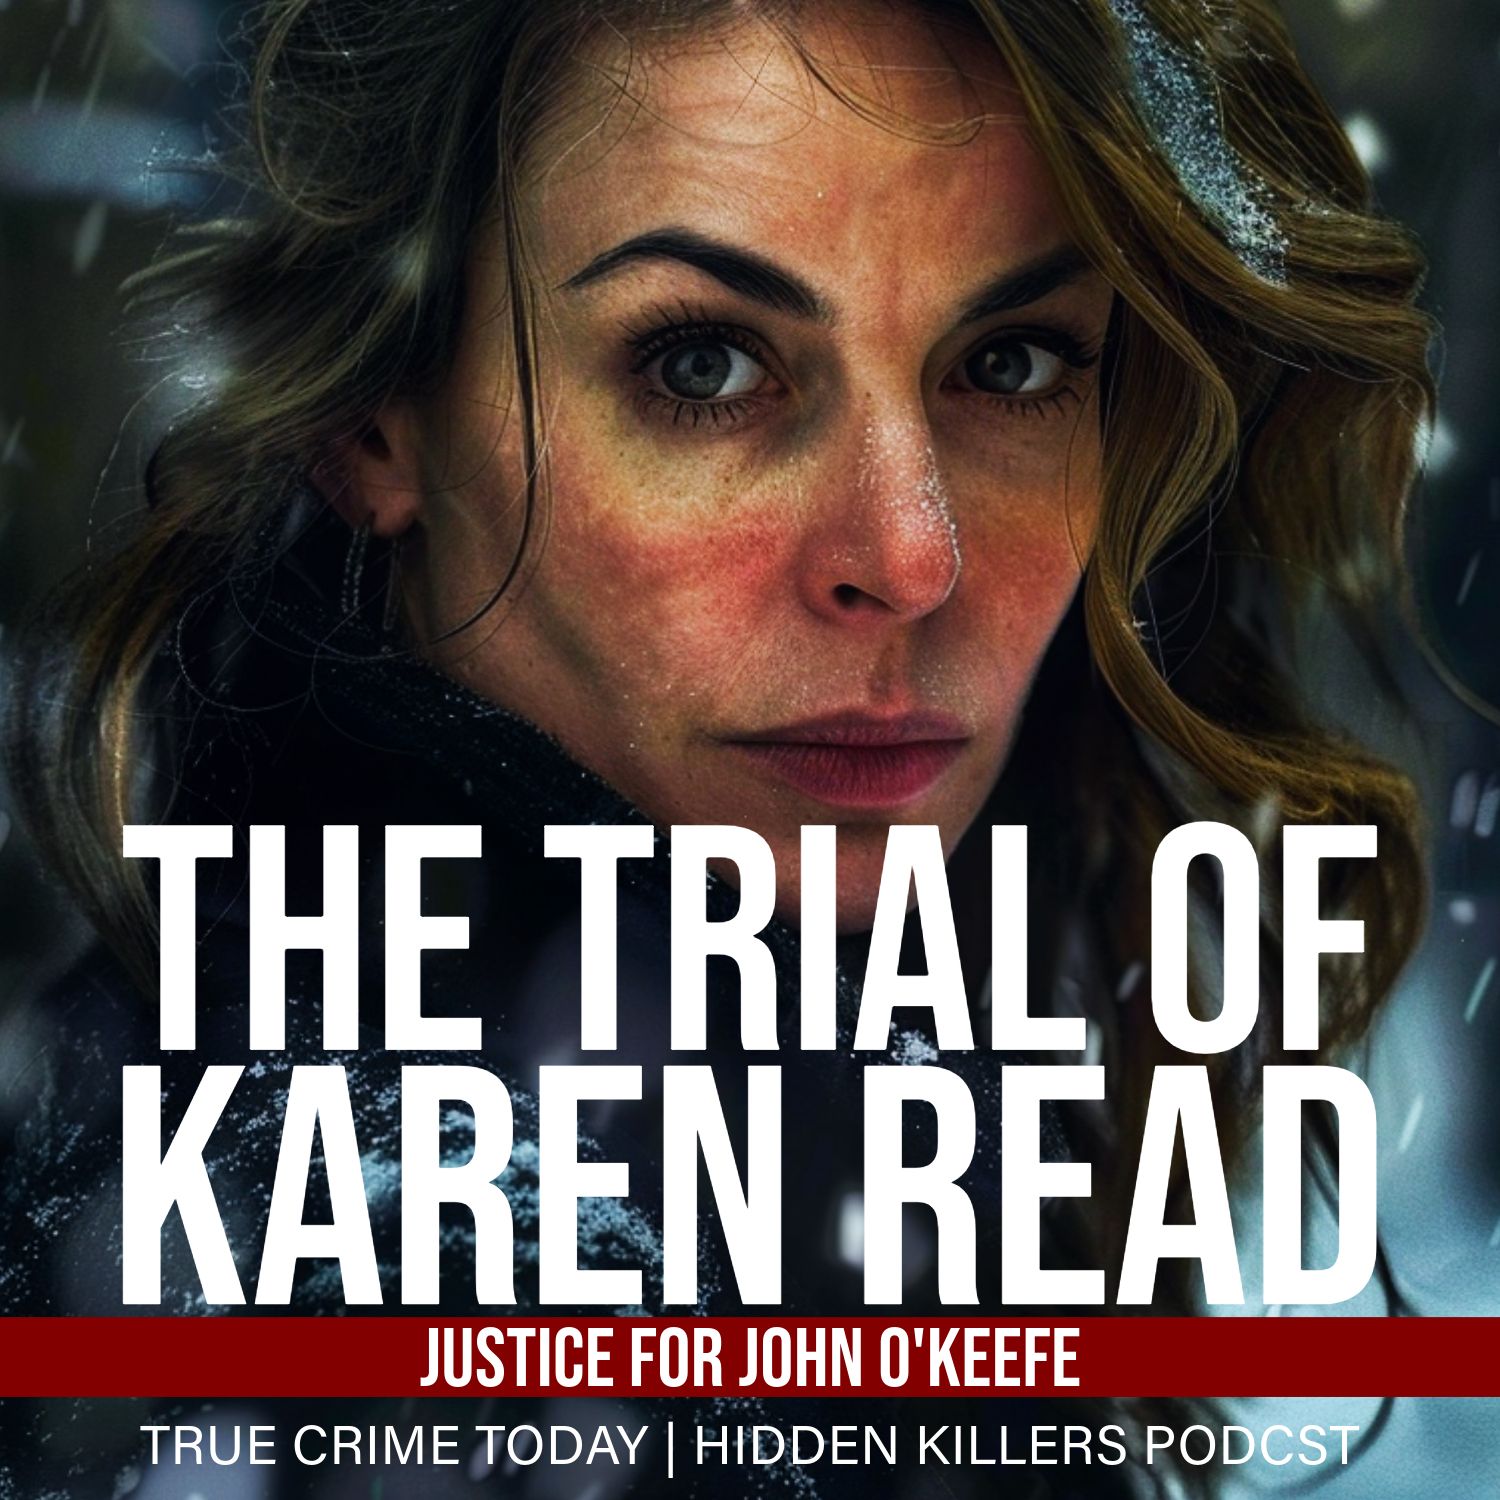 Is The Defense Of Karen Read Getting Desperate To Paint A Conspiracy Story?